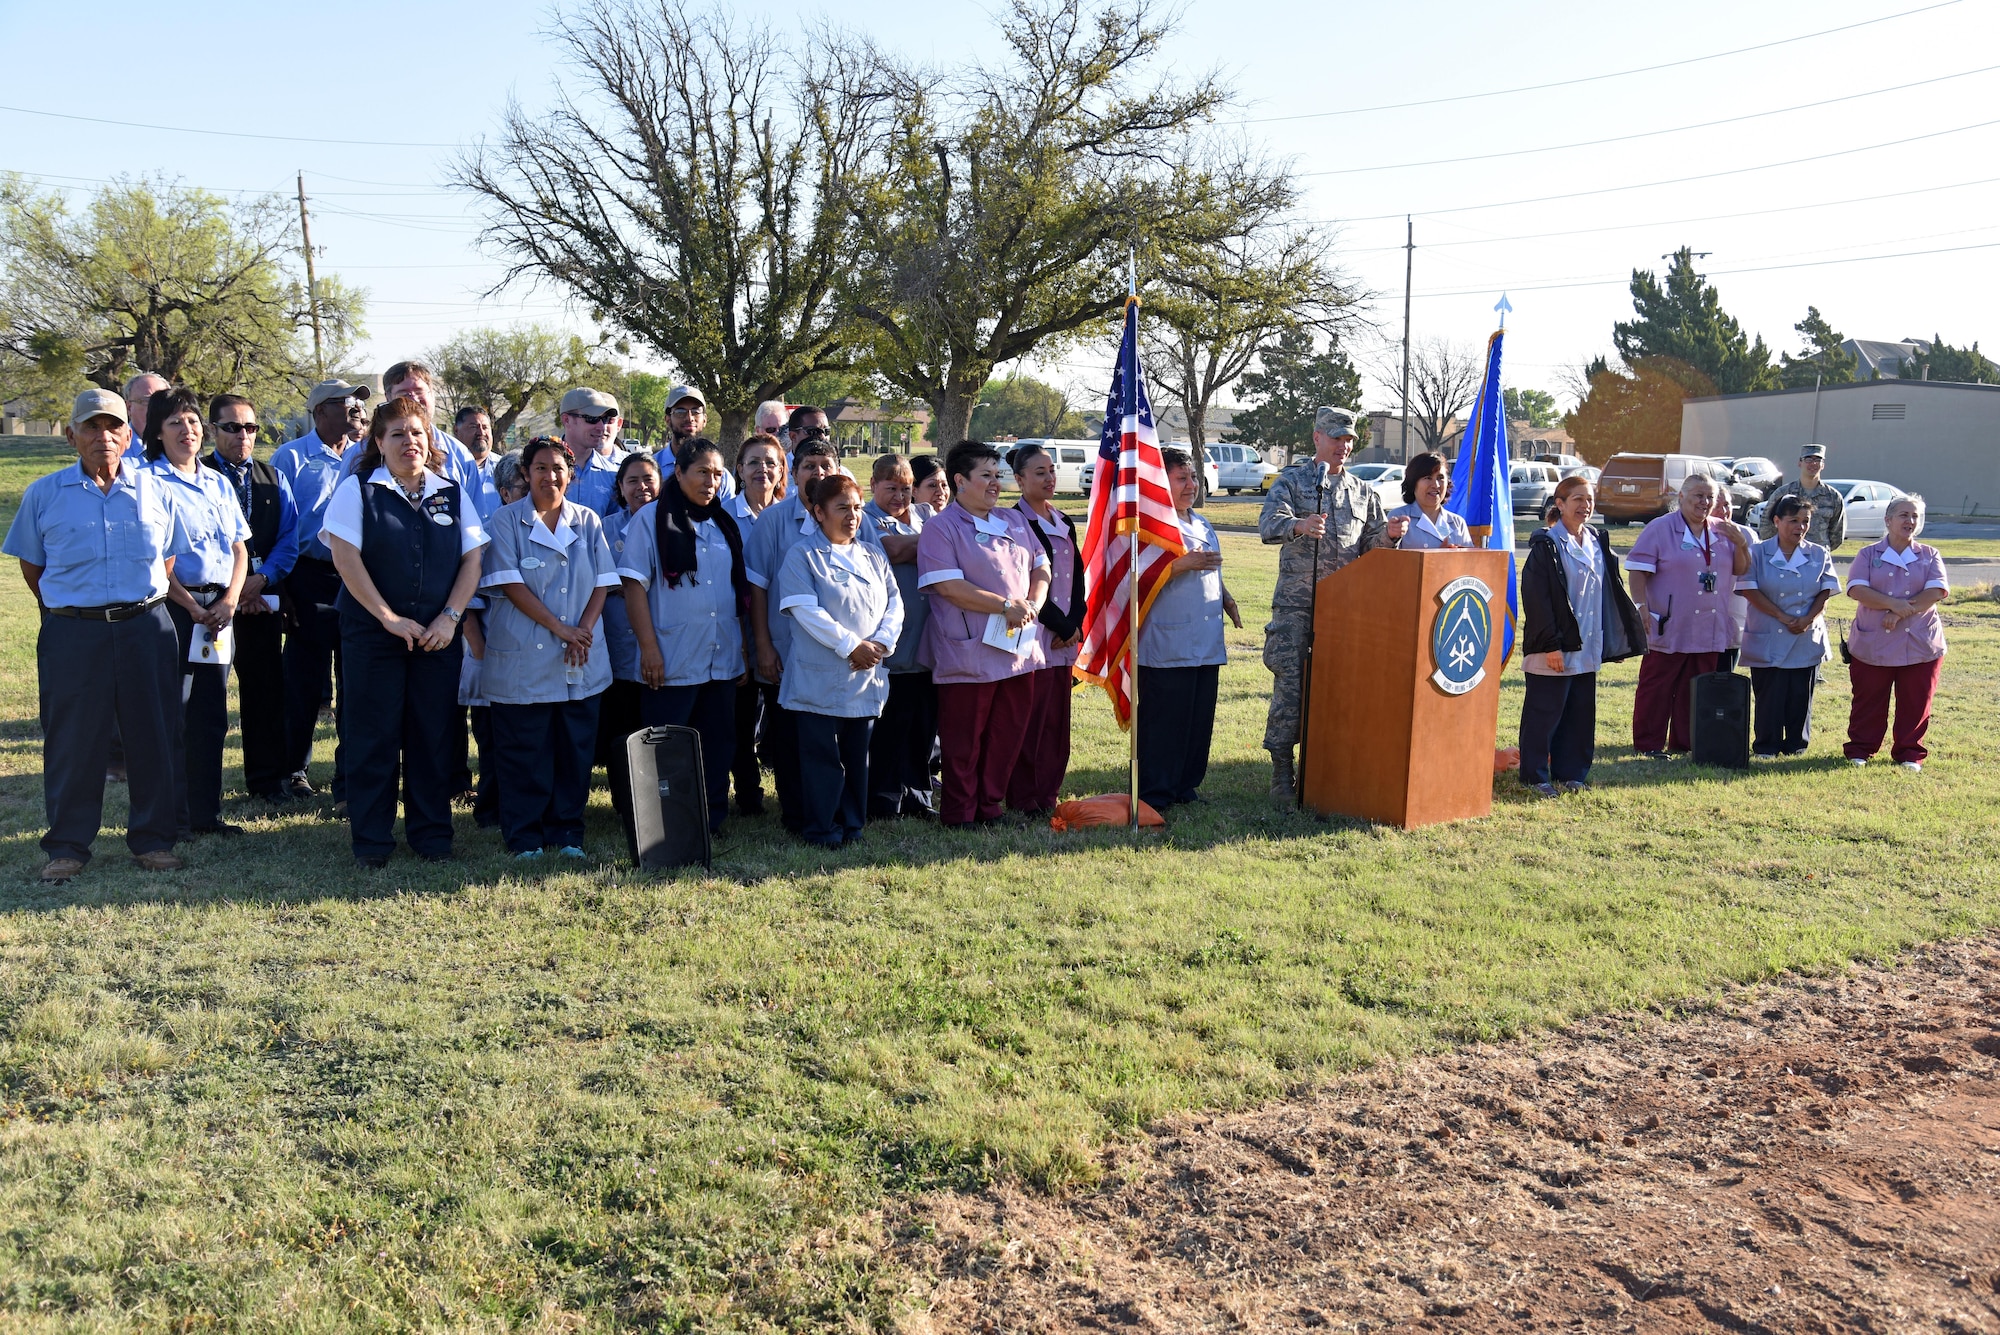 U.S. Air Force Col. Michael Downs, 17th Training Wing Commander, speaks during the new temporary lodging facility ground breaking near the base theater on Goodfellow Air Force Base, Texas March 20, 2017. During his speech, he invited all the hospitality staff to join him and thank them for their hard work. (U.S. Air Force photo by Staff Sgt. Joshua Edwards/Released)